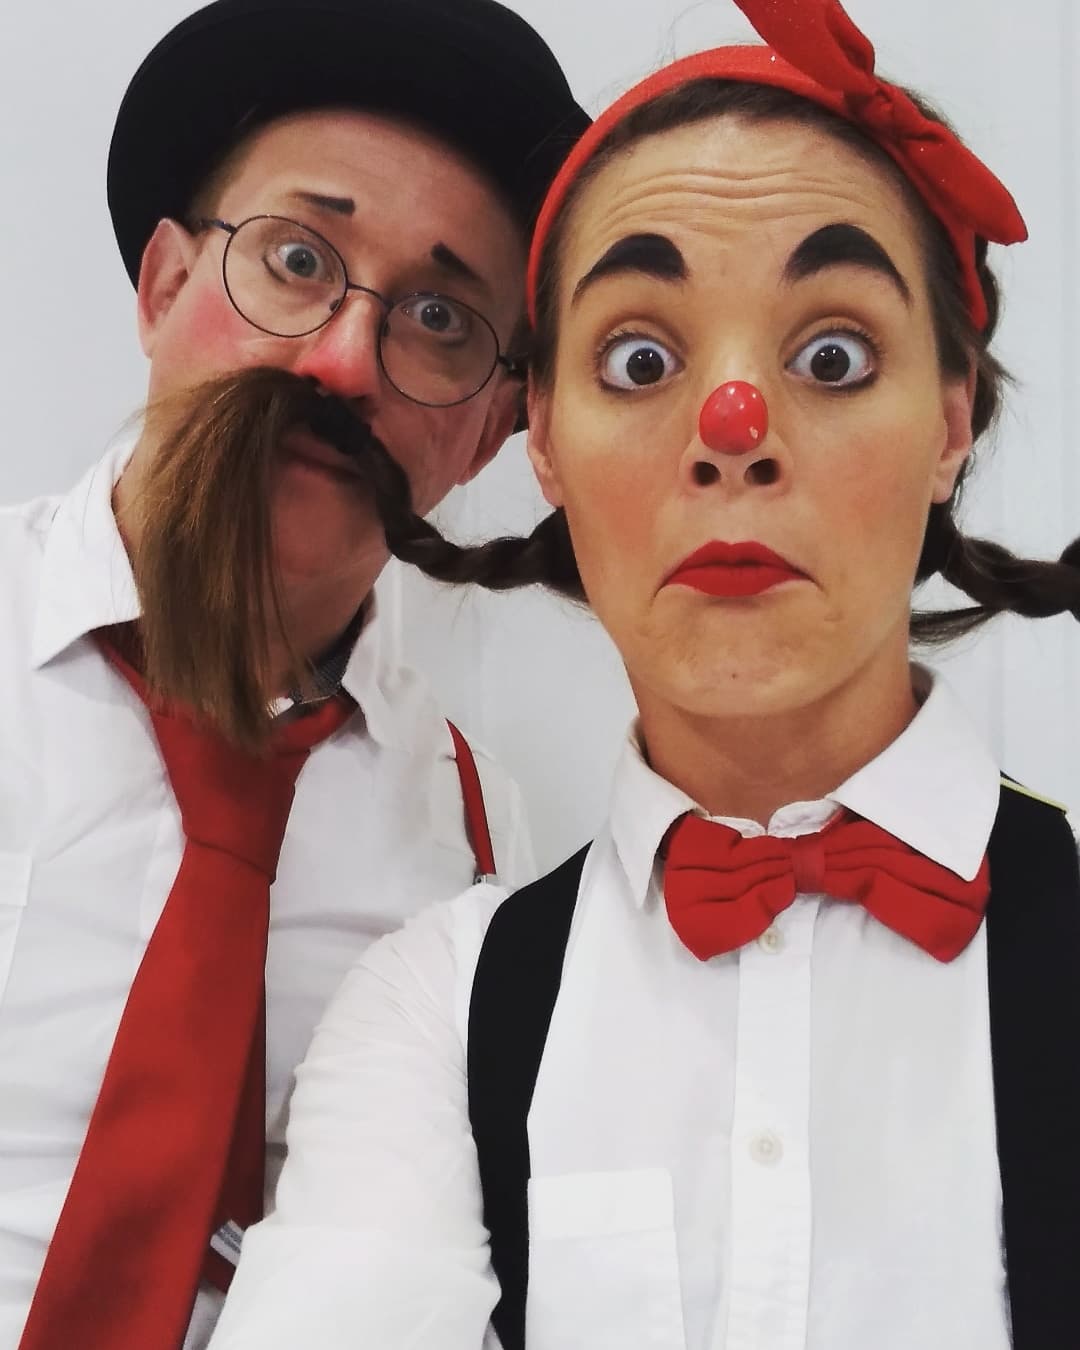 A male and female clown making silly expressions.